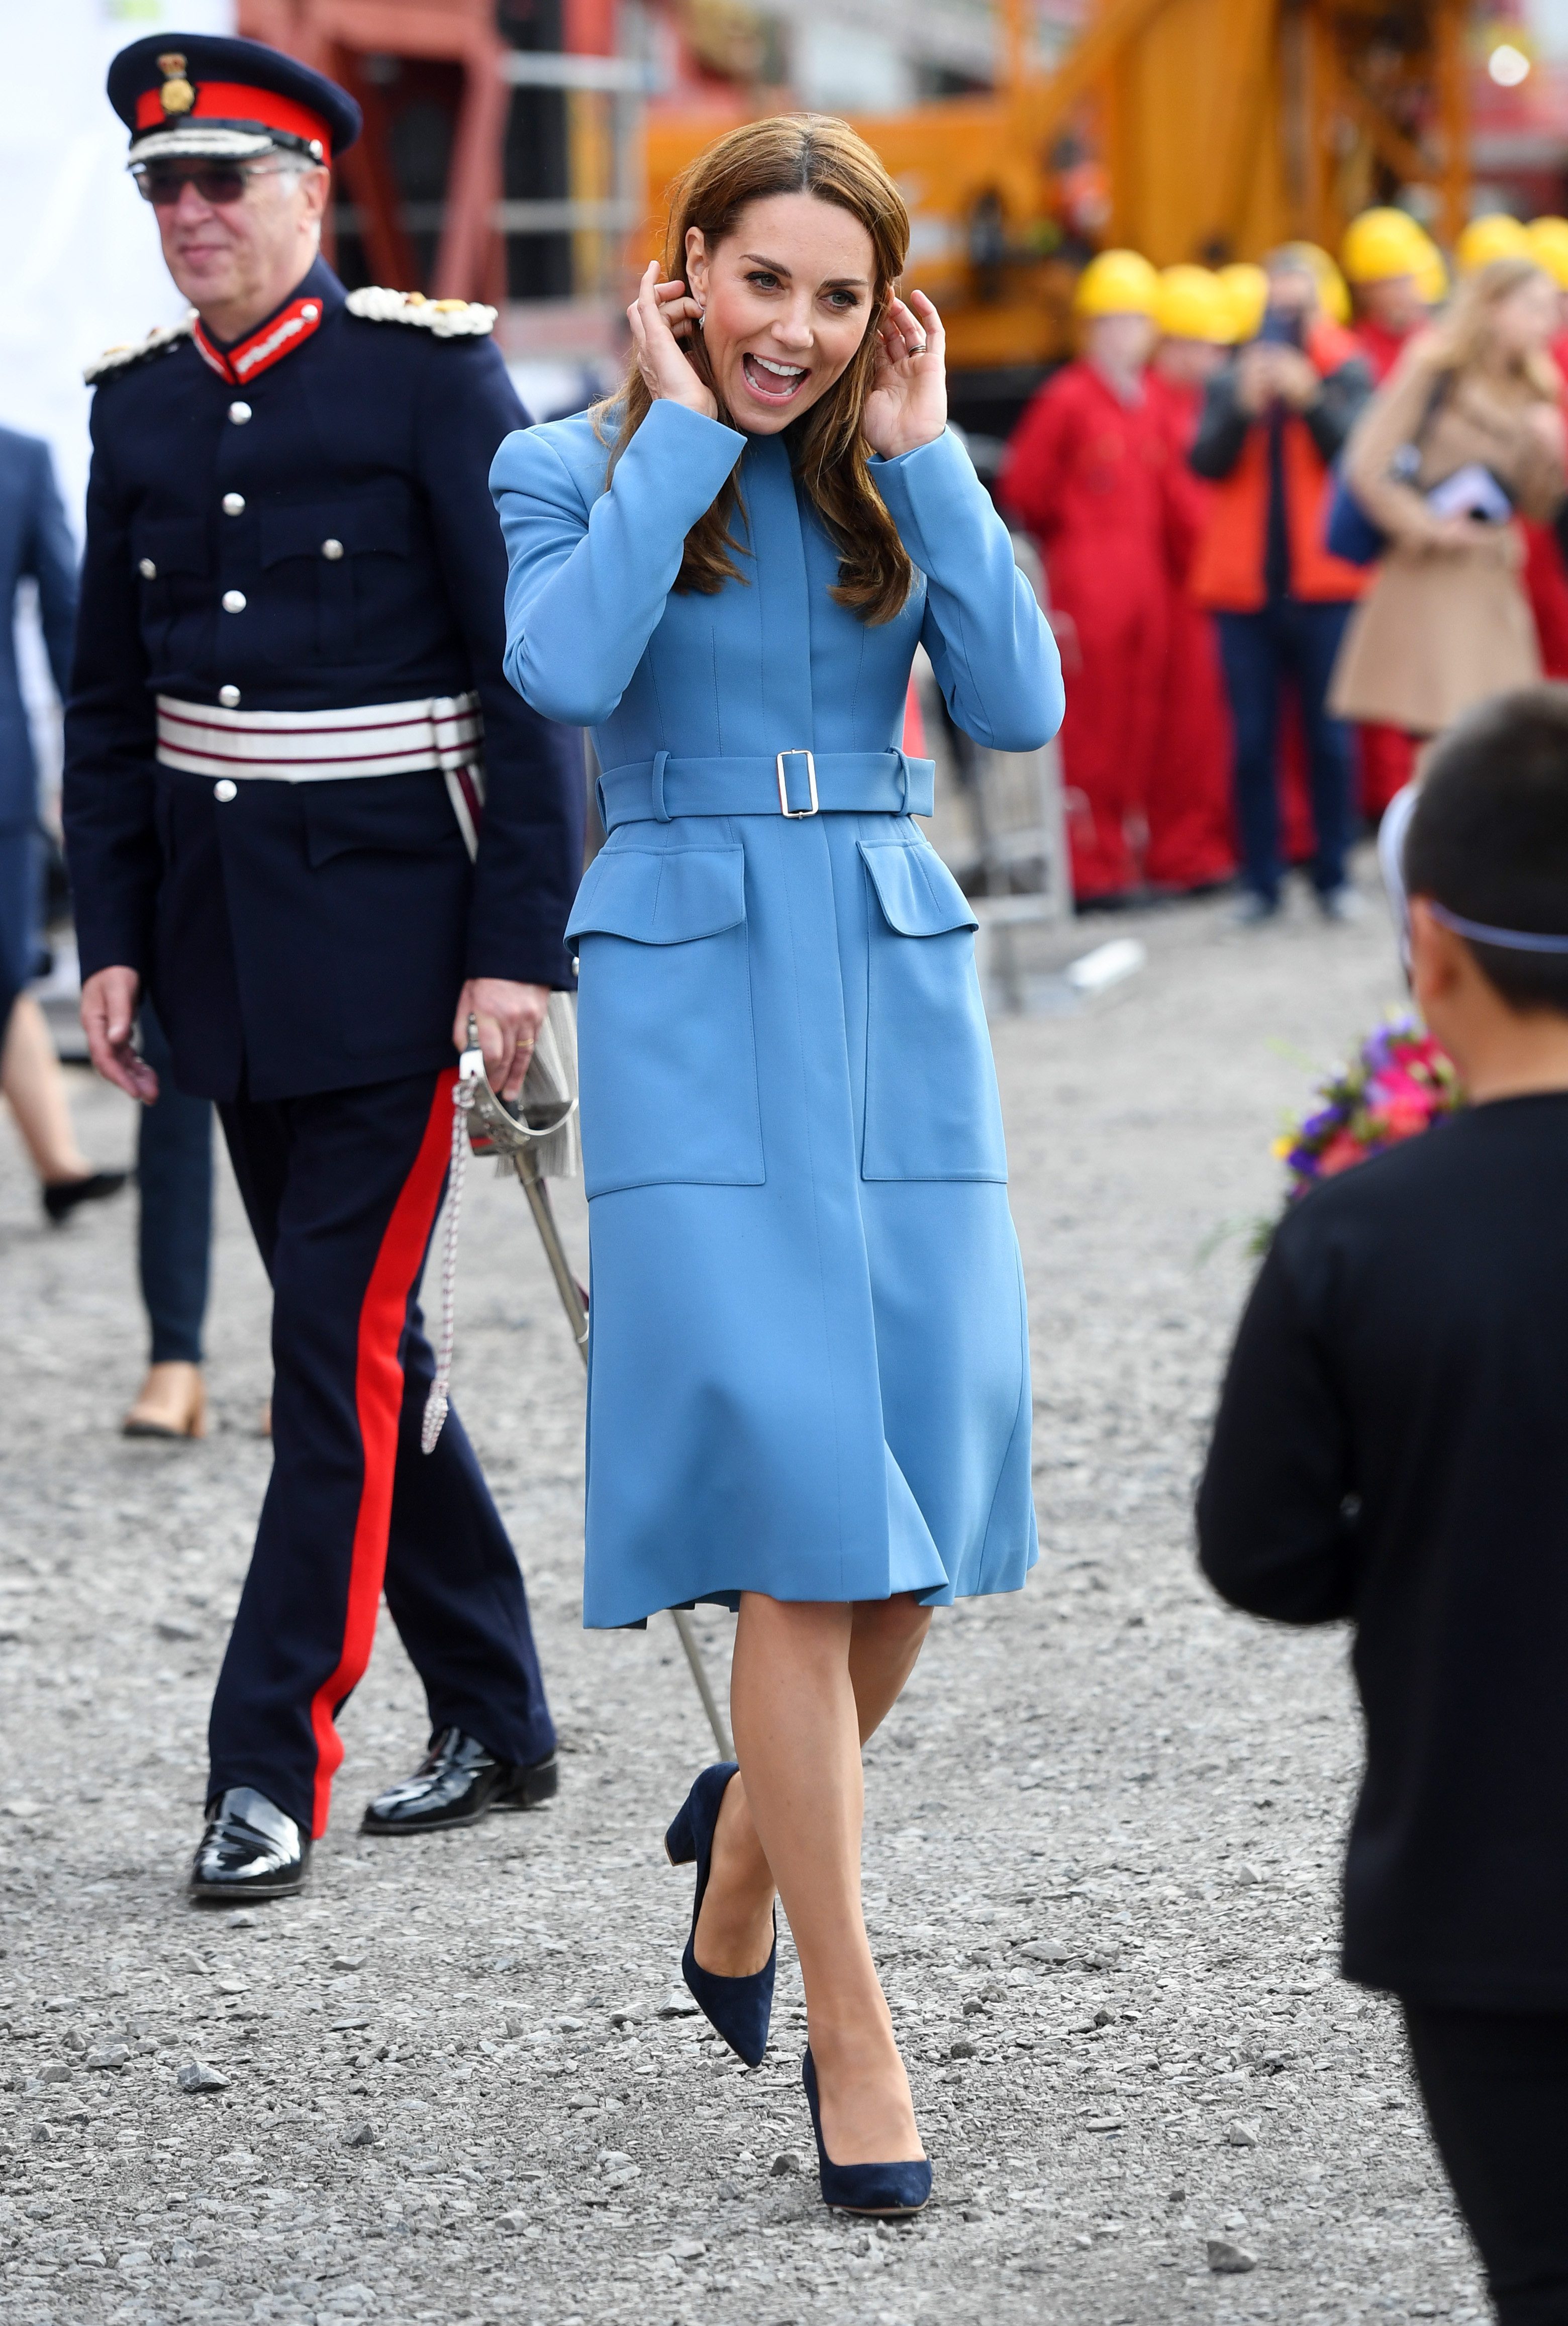 Kate Middleton Again Makes A Case For Recycled Fashion - Grazia